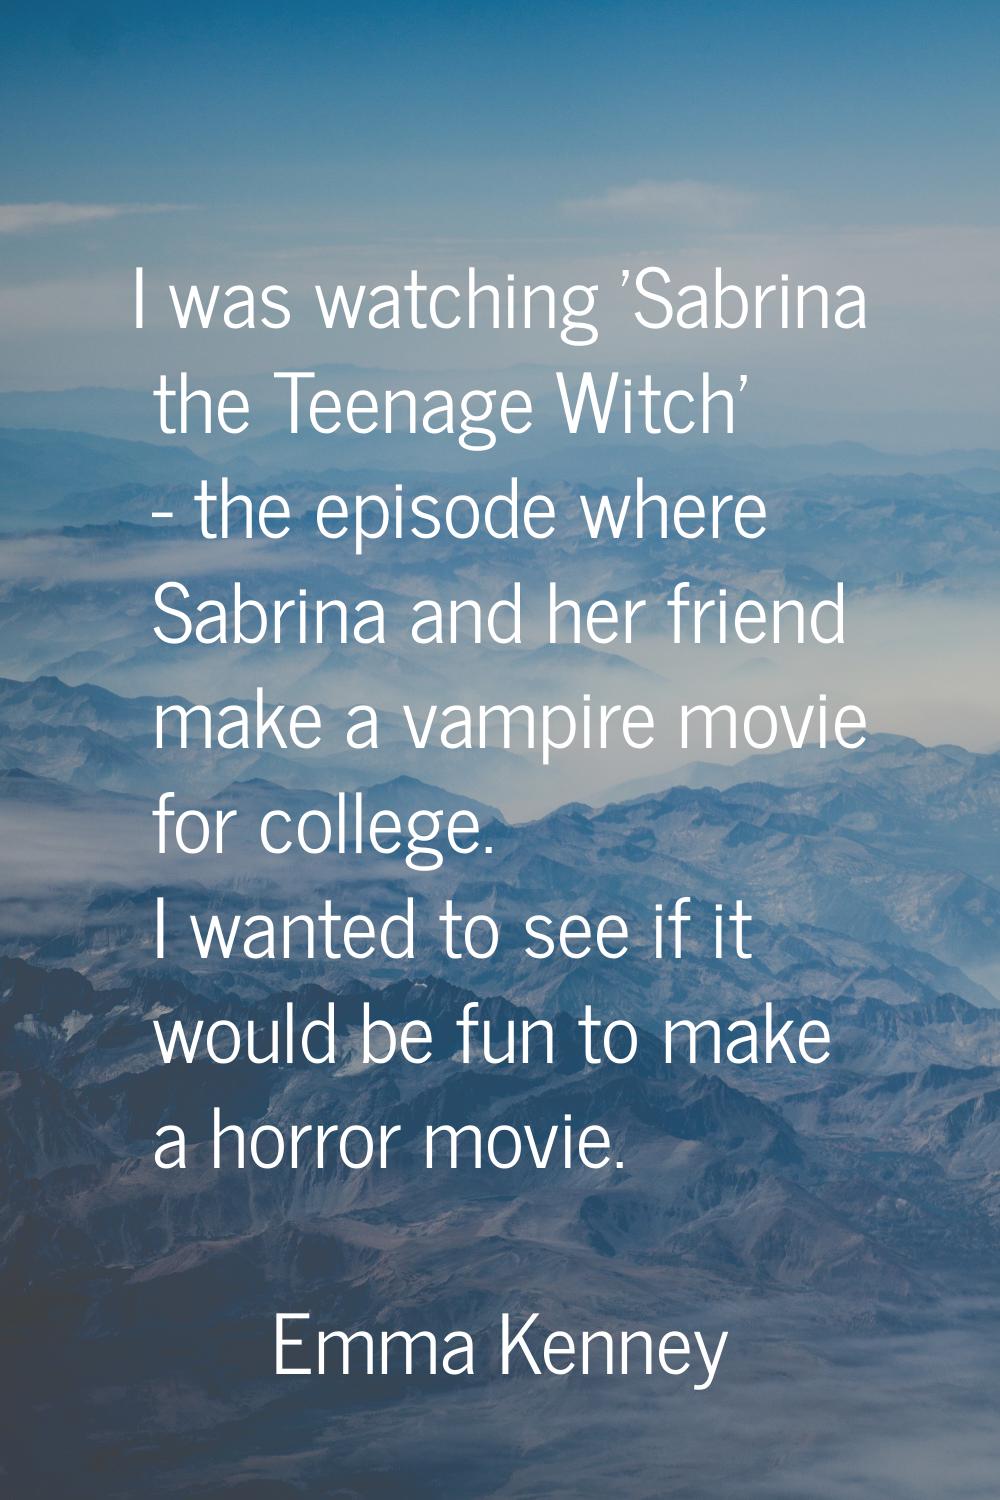 I was watching 'Sabrina the Teenage Witch' - the episode where Sabrina and her friend make a vampir